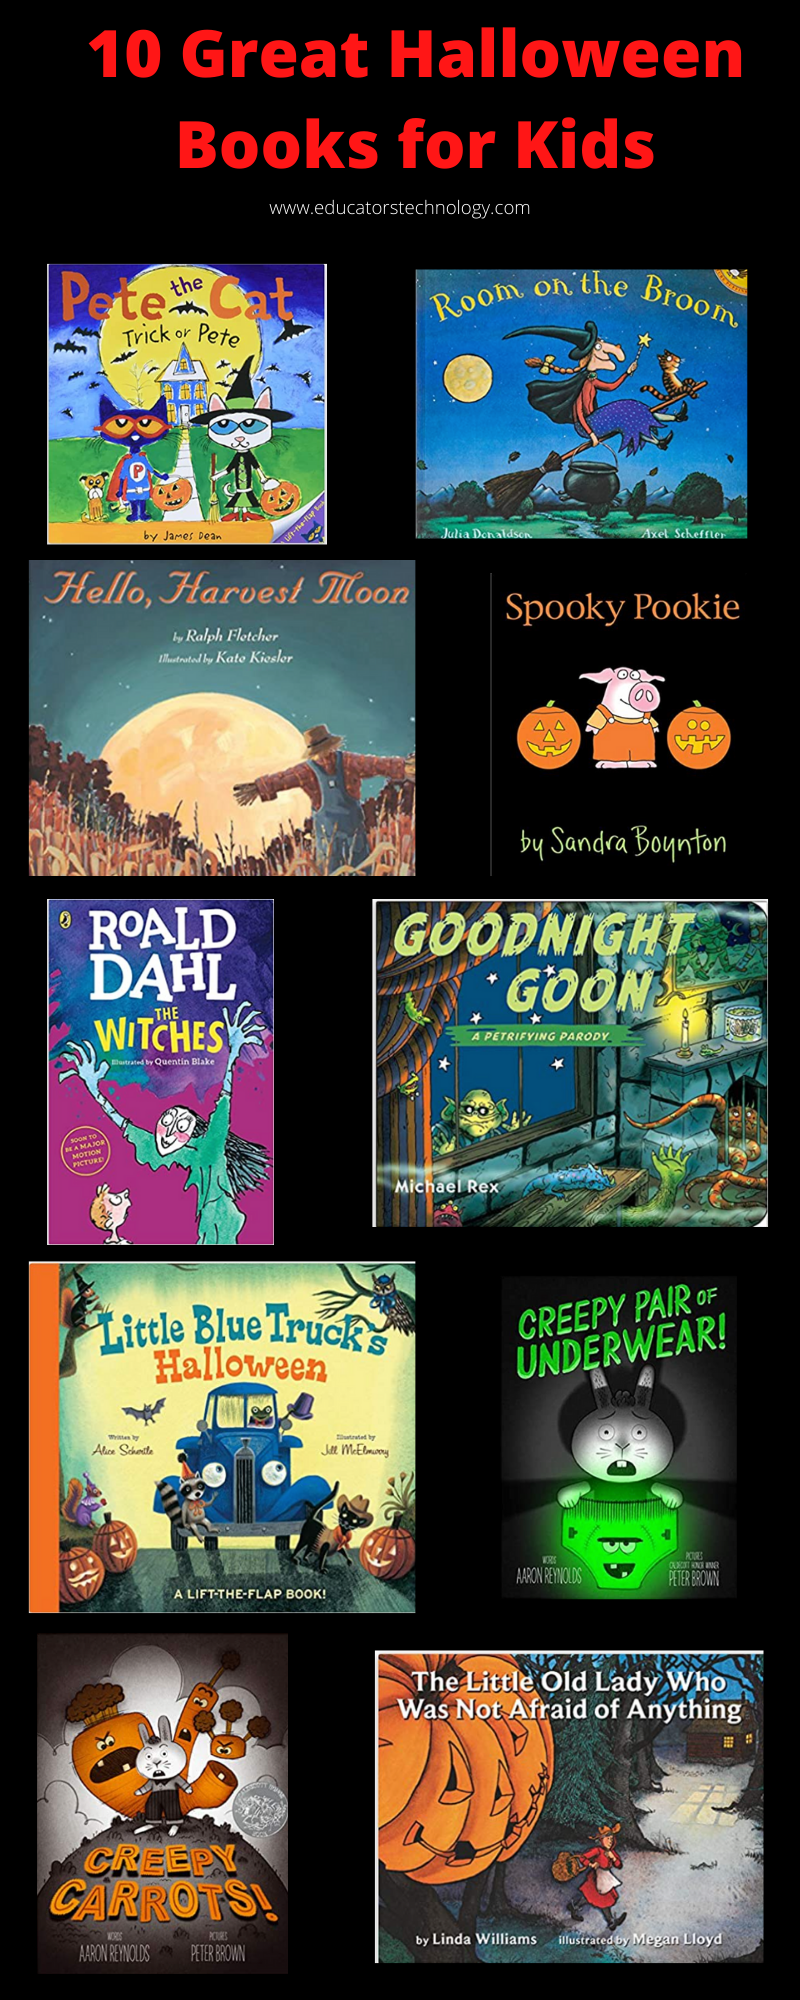 10 Great Halloween Books for Kids